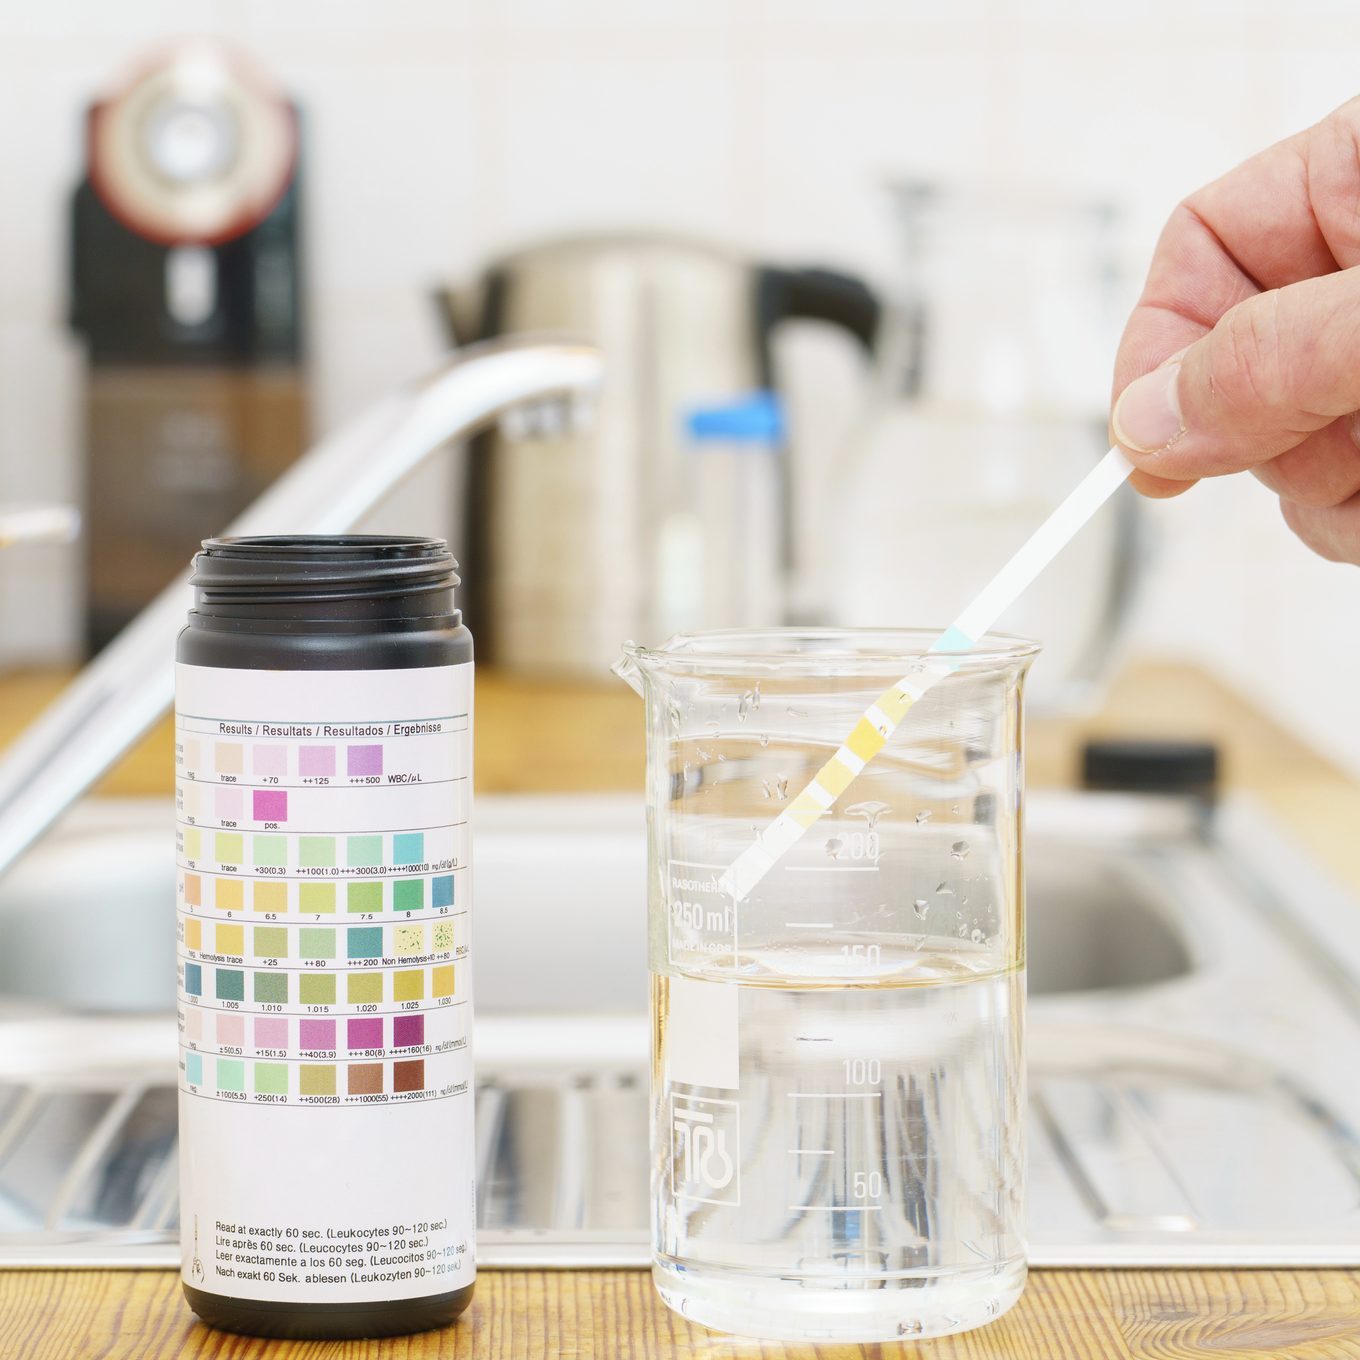 Best Well Water Analysis Test Kit To Ensure Home Water Safety